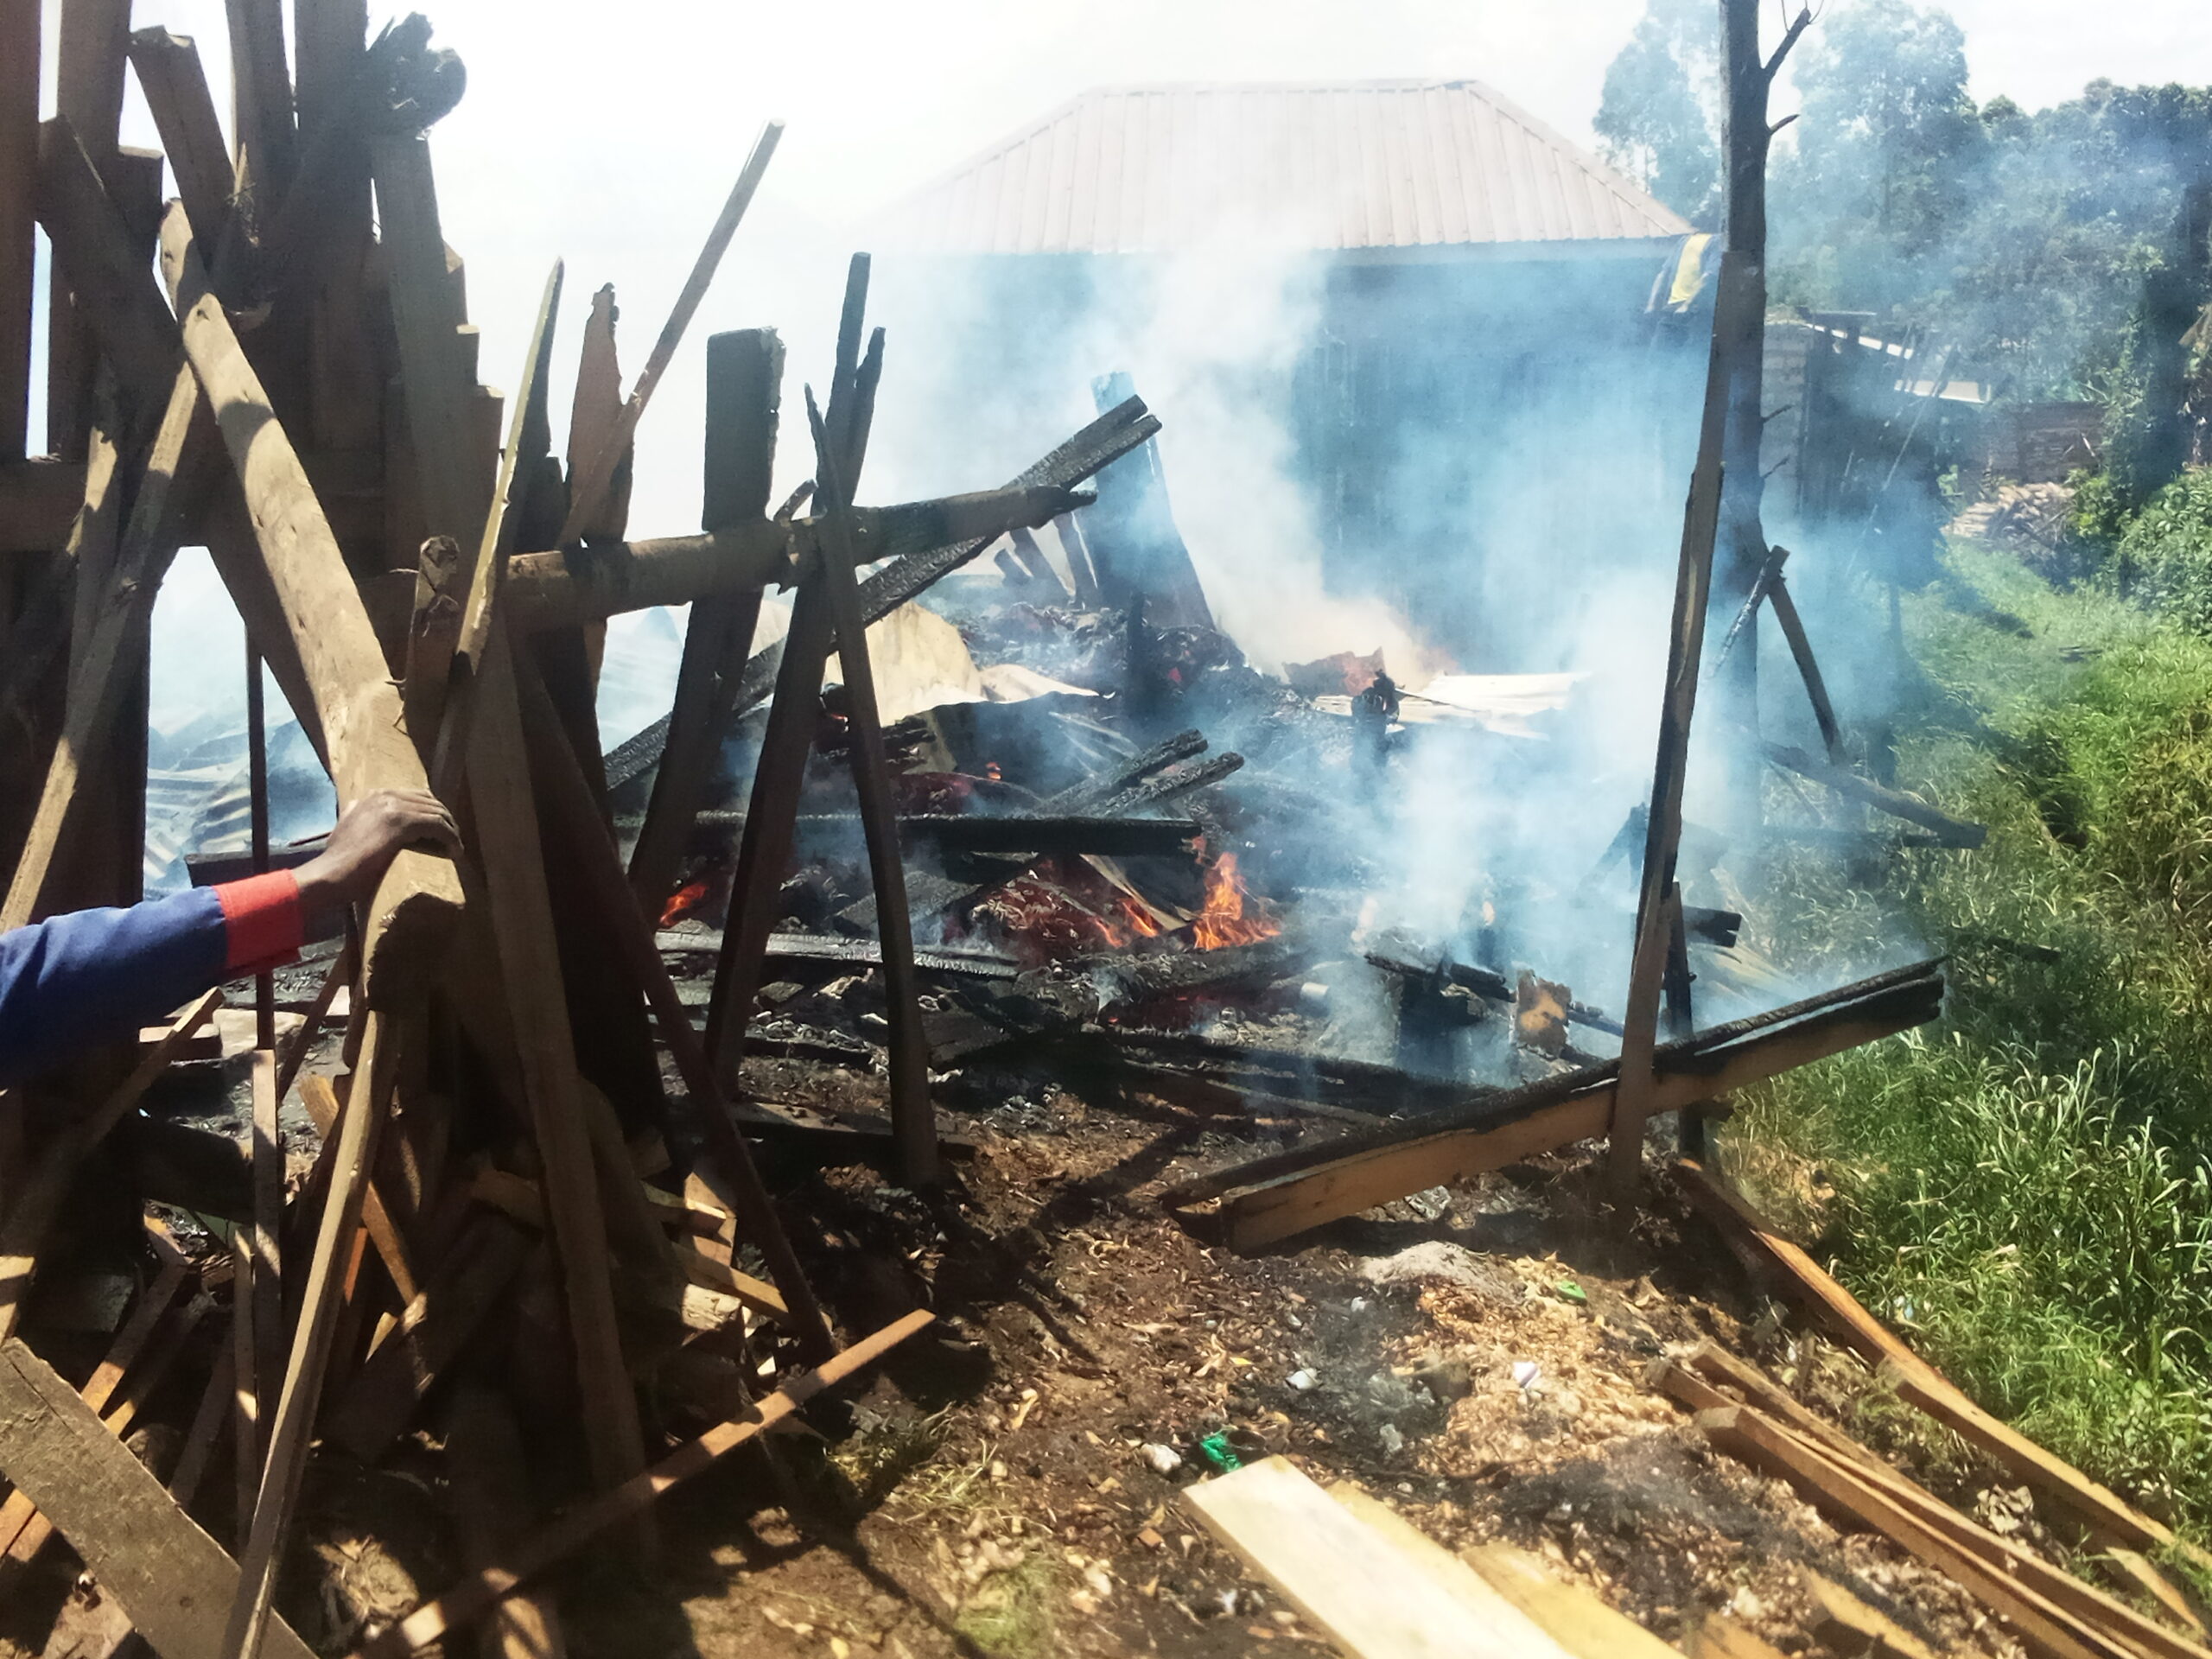 Timber Merchants in Kabale Count Losses in Fire Outbreak